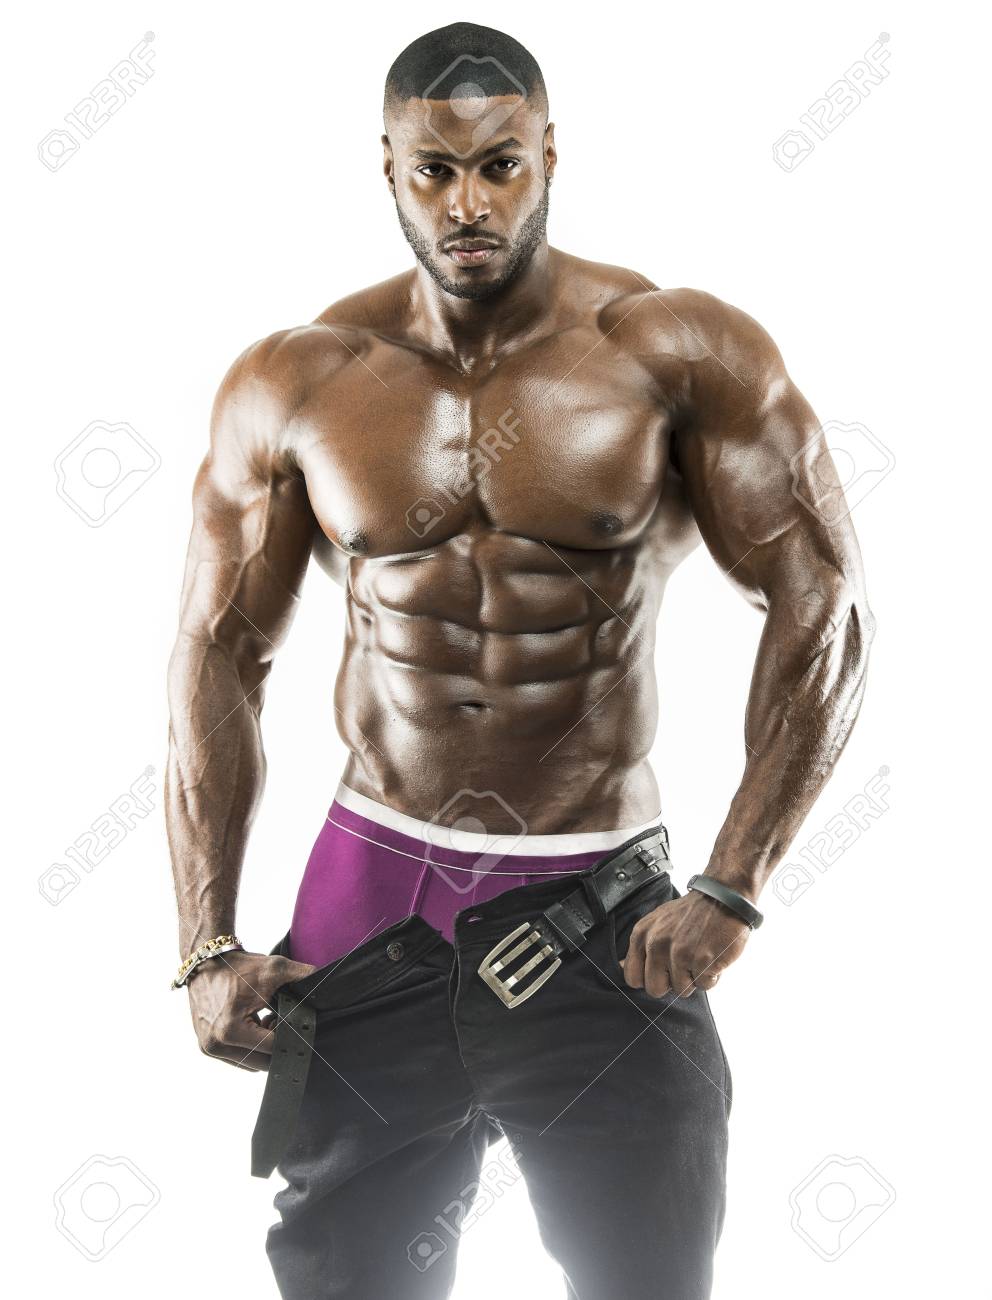 Best of Black guy with abs